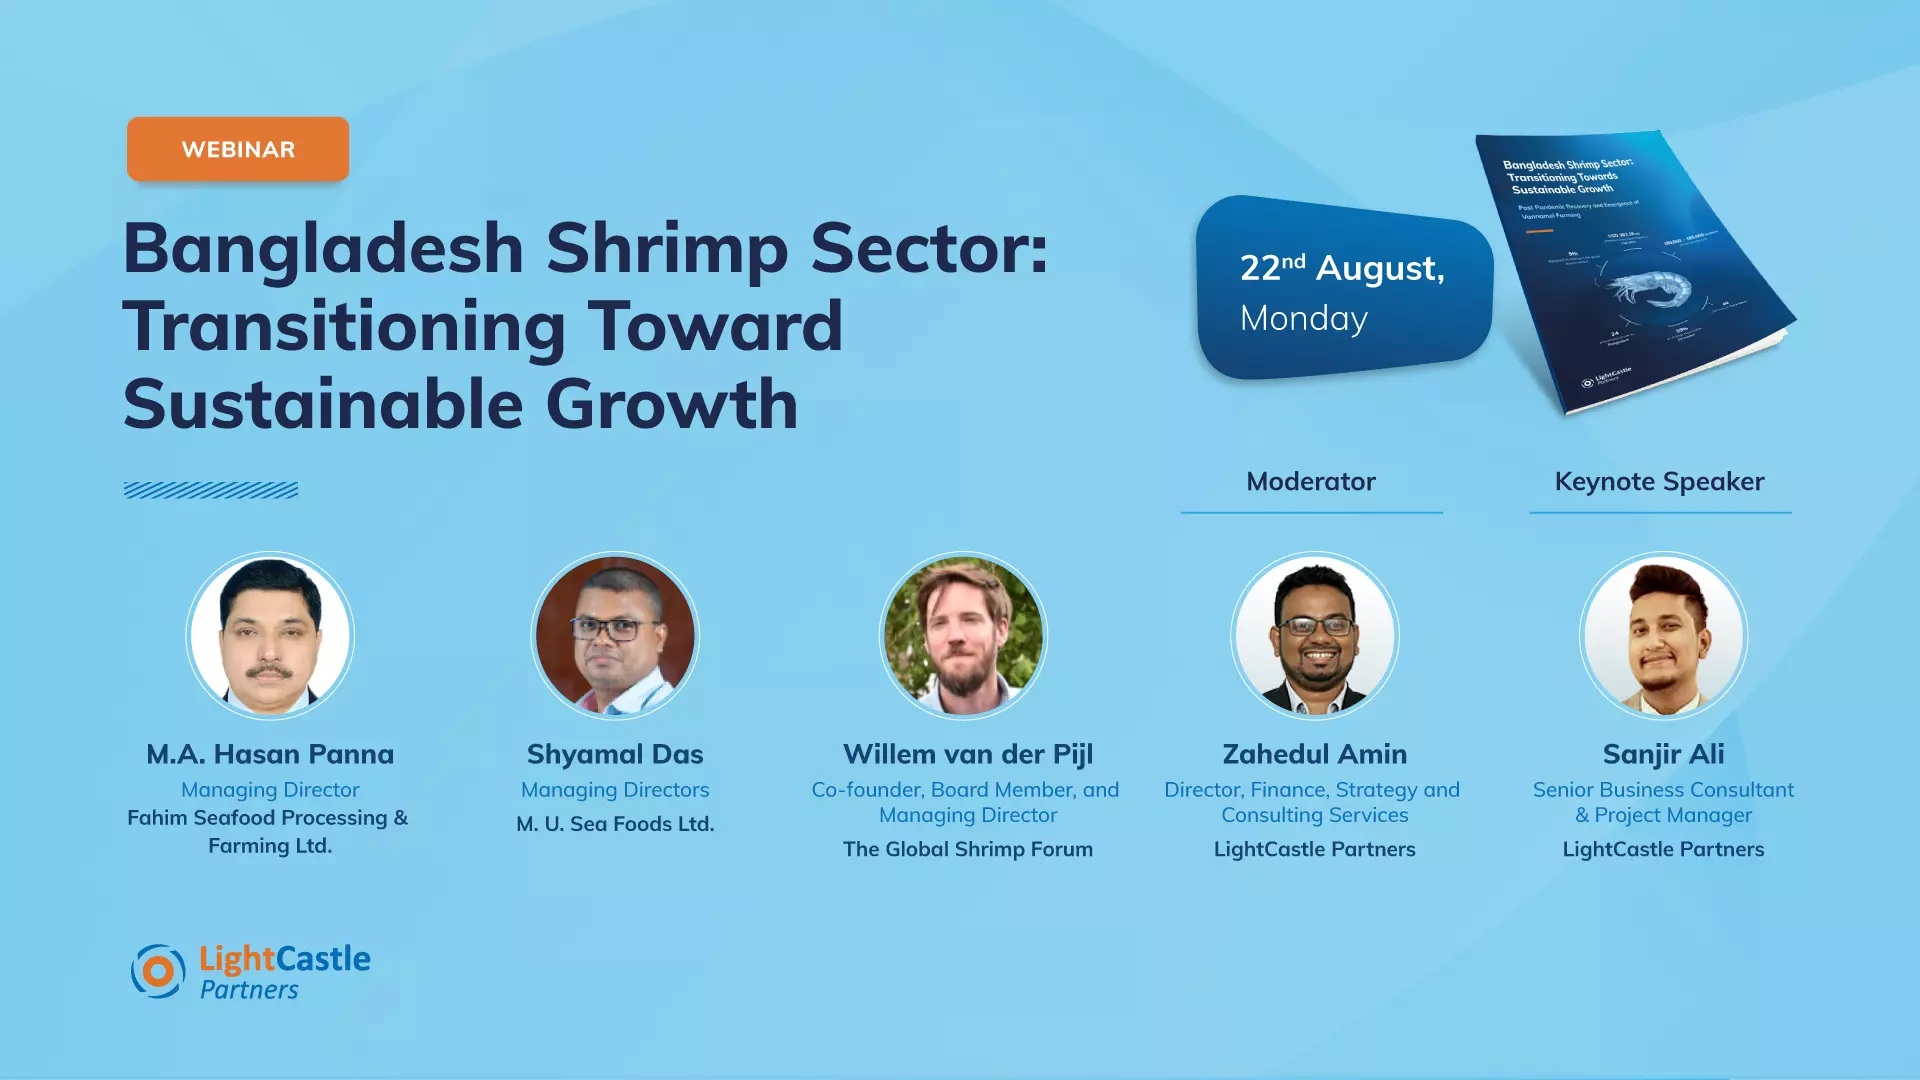 Summary of the Webinar on the Future of the Shrimp Sector in Bangladesh